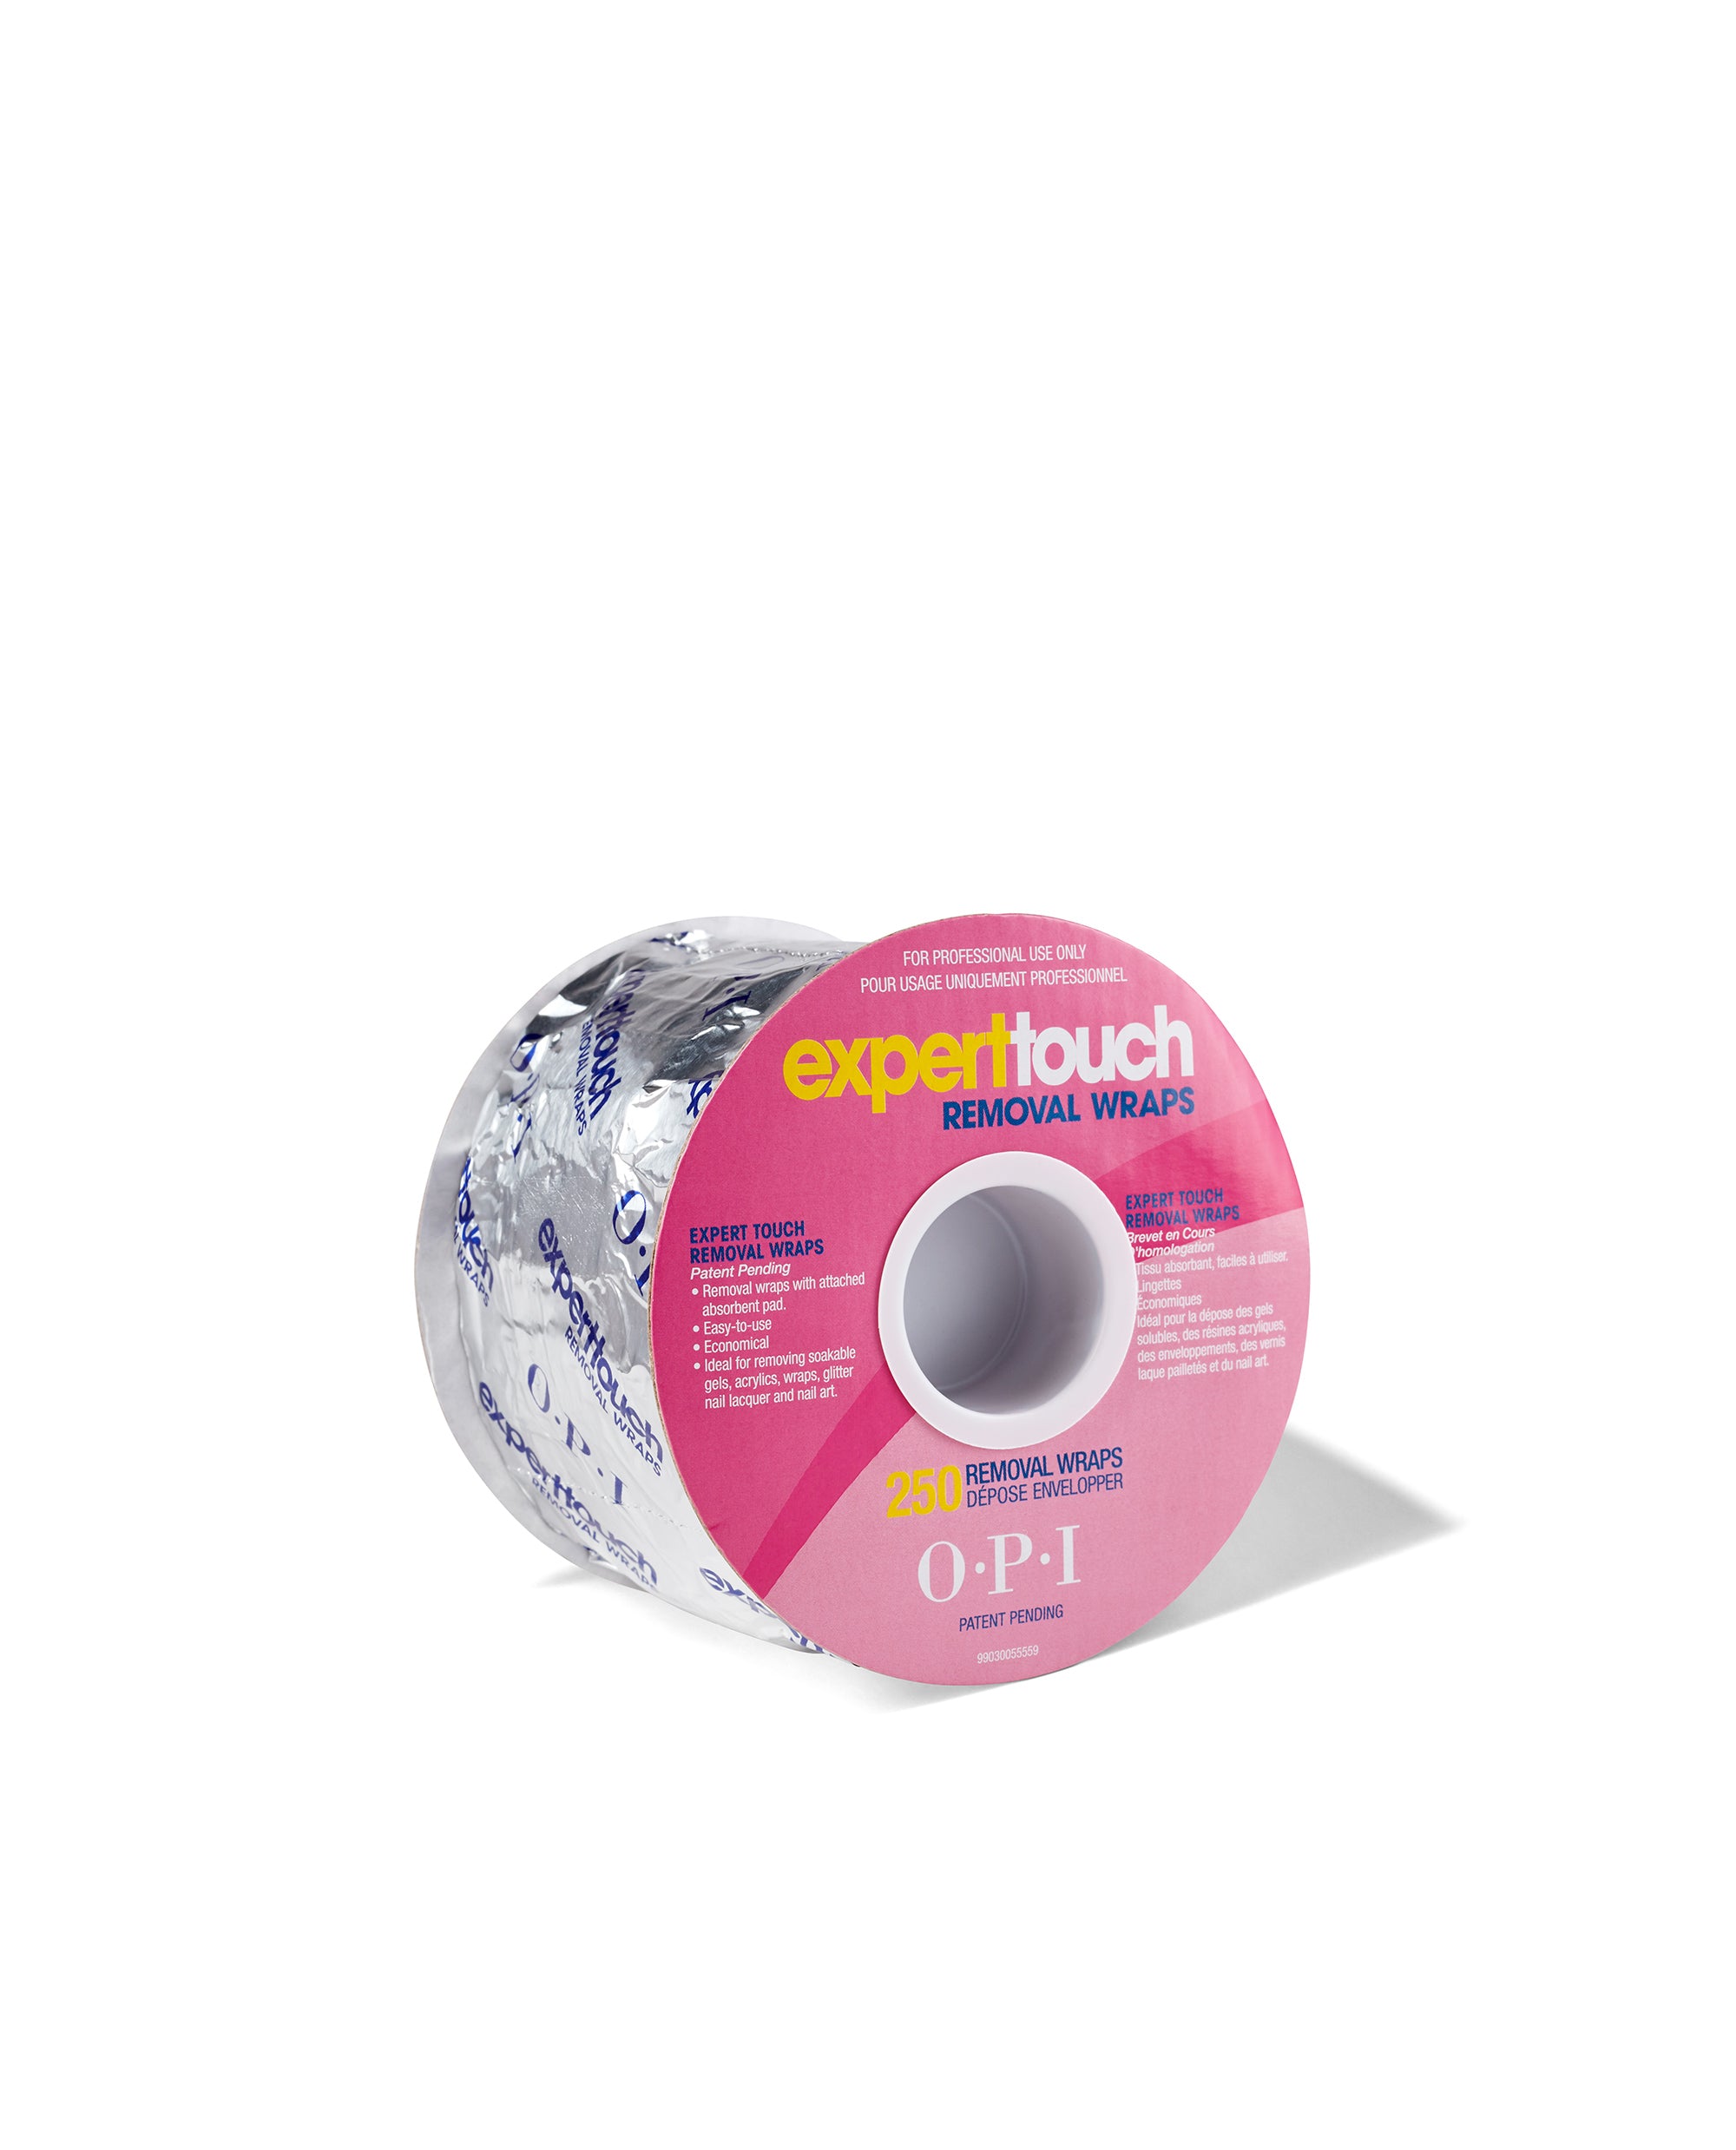 OPI Expert Touch Removal Wraps 250 ct